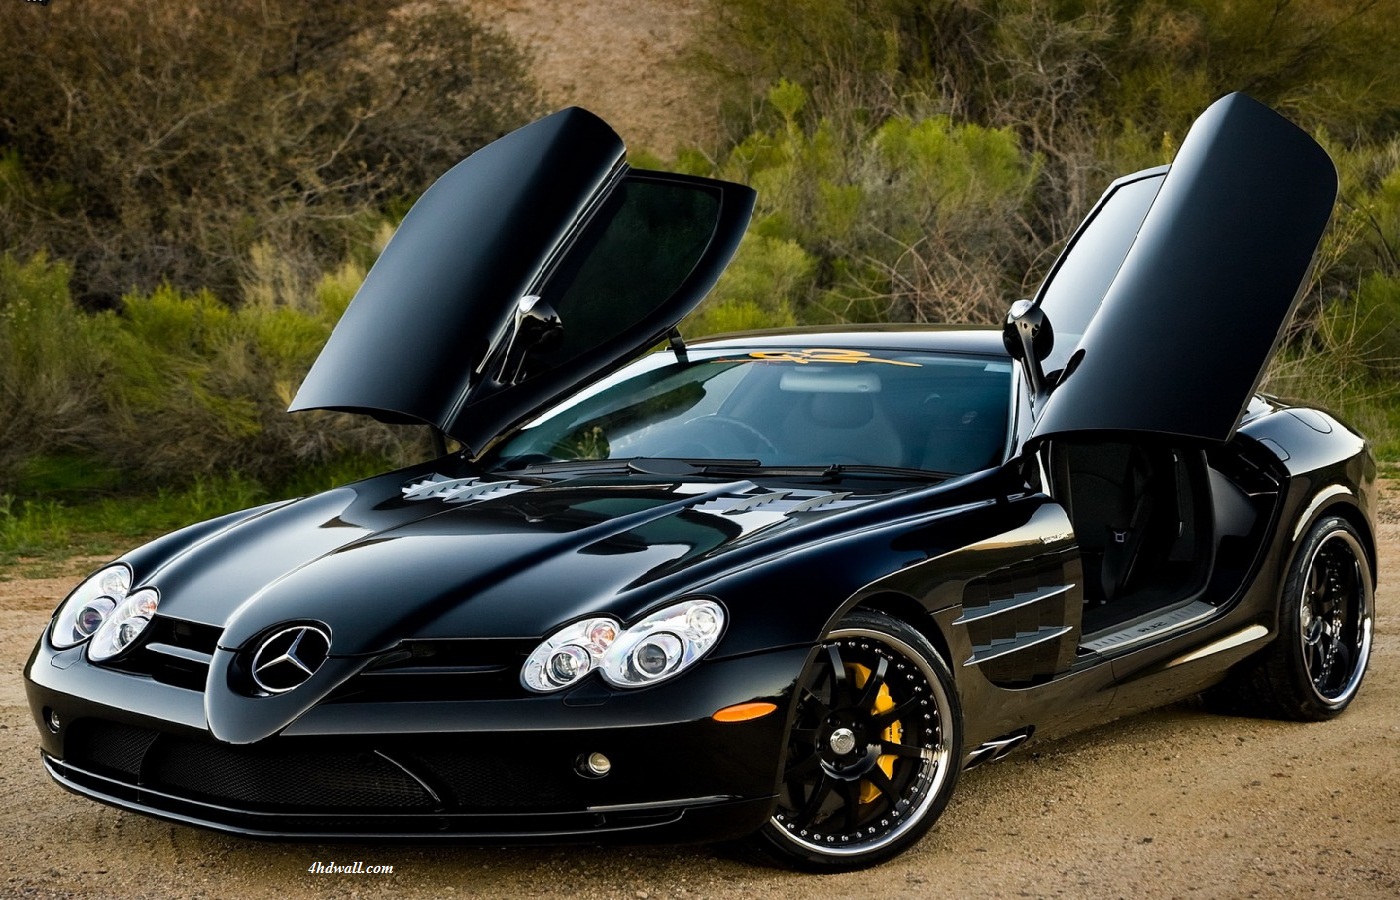 Benz Car Wallpapers Free Download